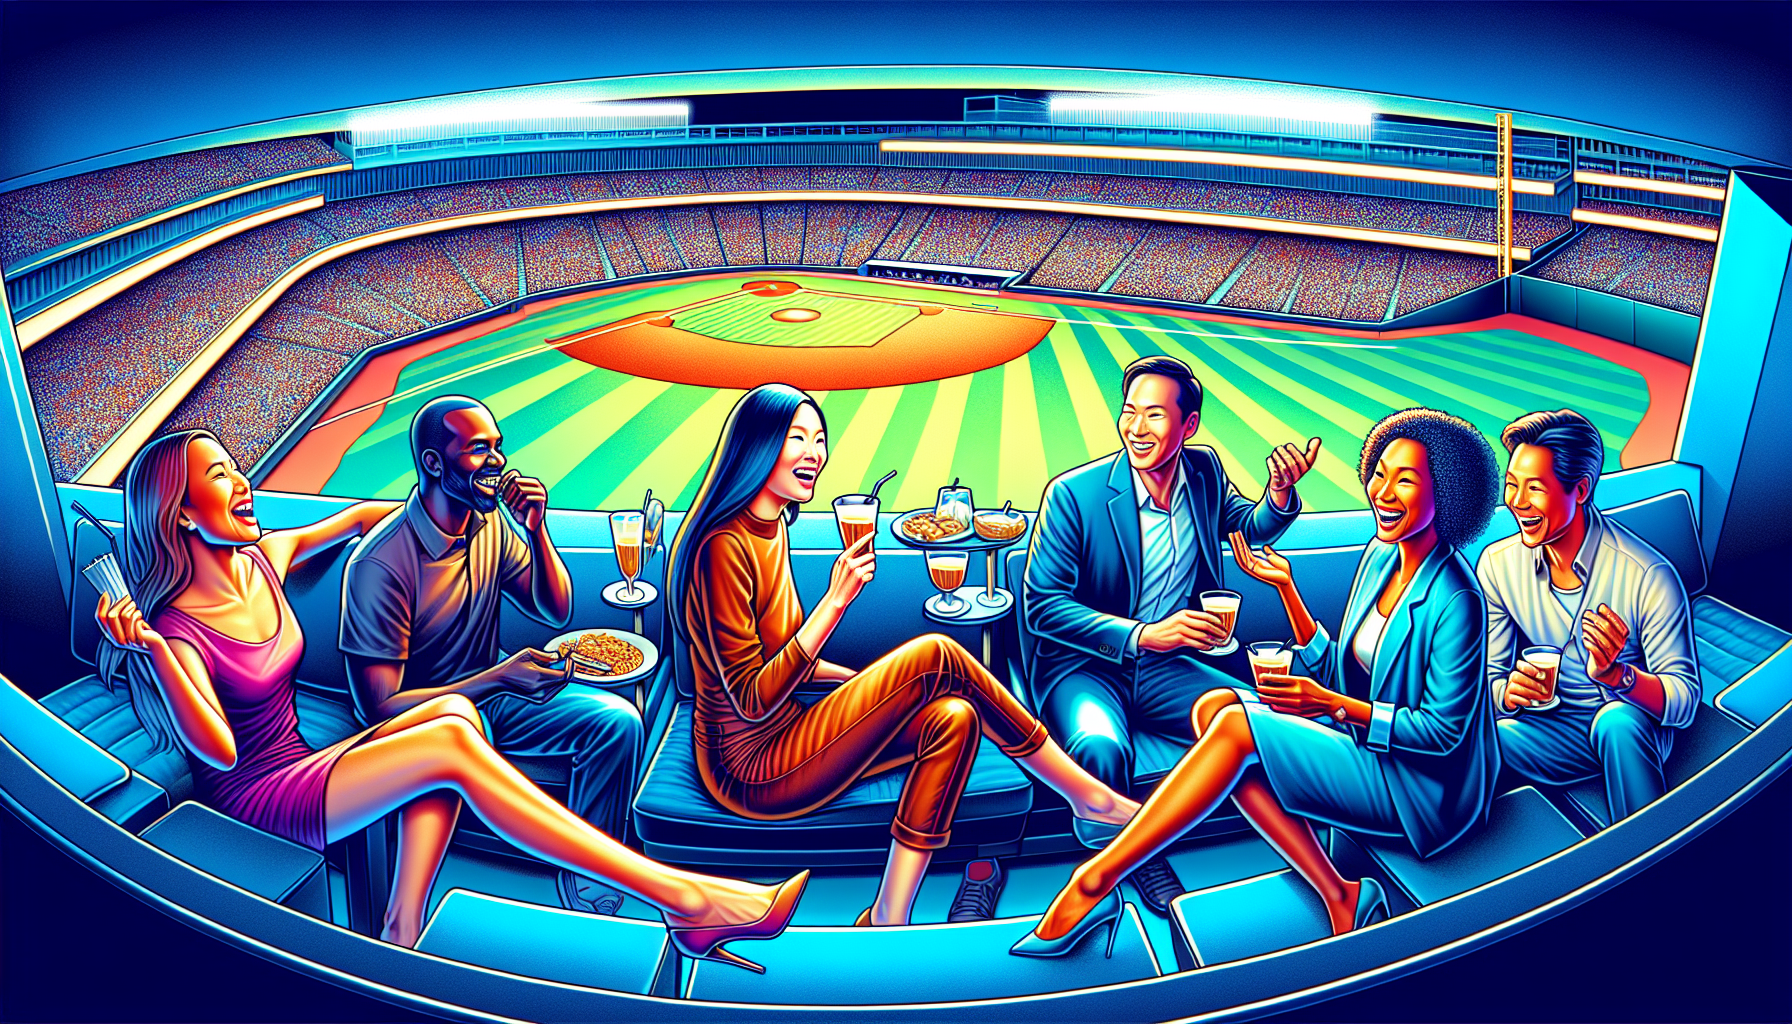 Illustration of a group socializing and enjoying the exclusive atmosphere of box seating at a baseball game